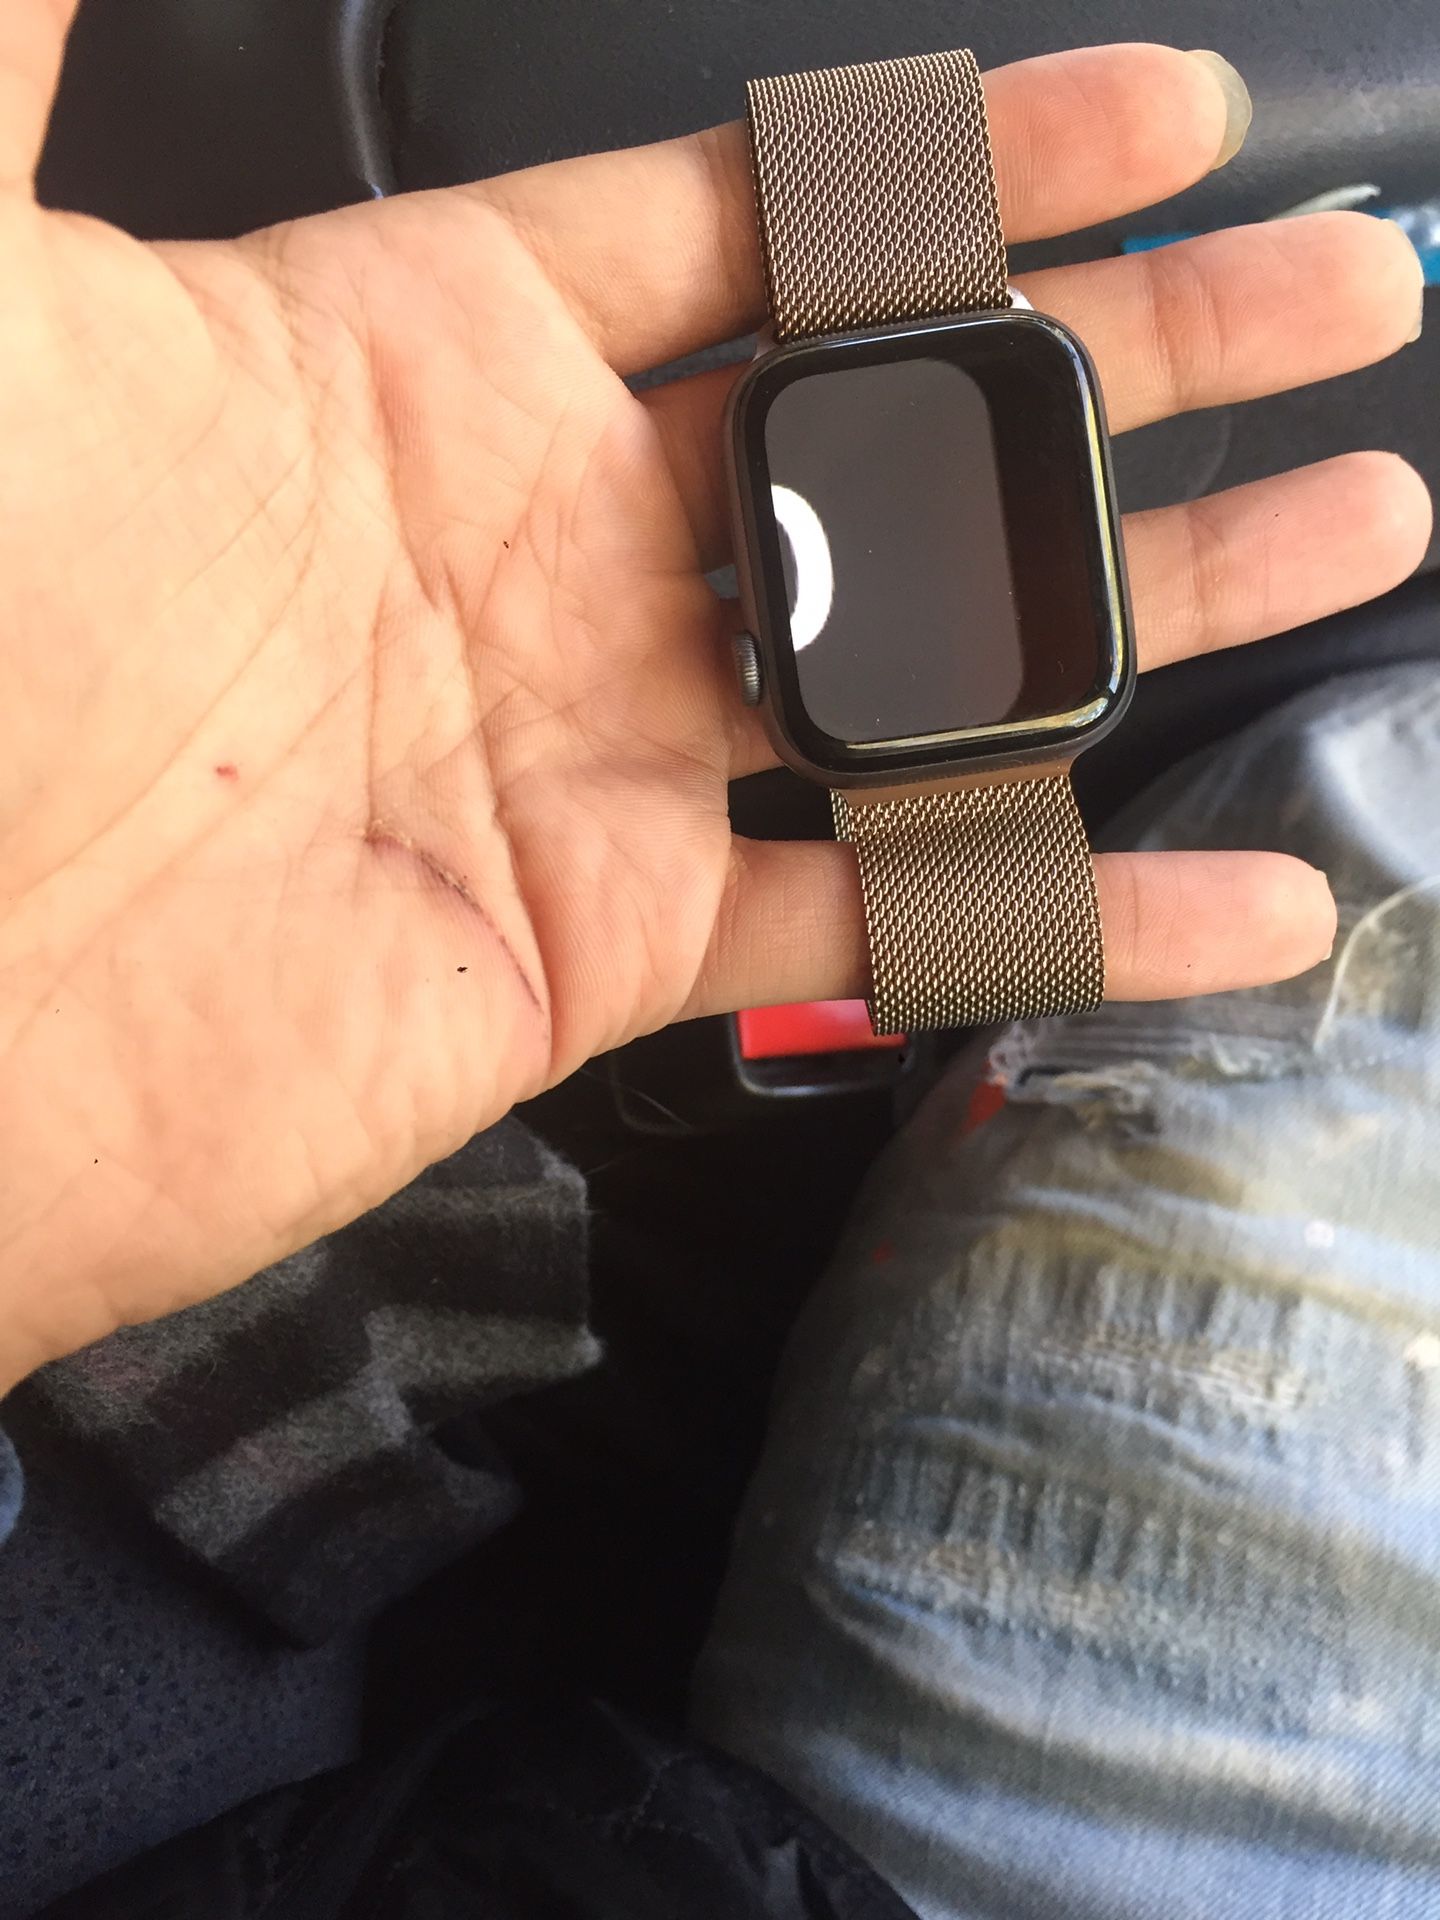 Rose gold Apple Watch need gone asap